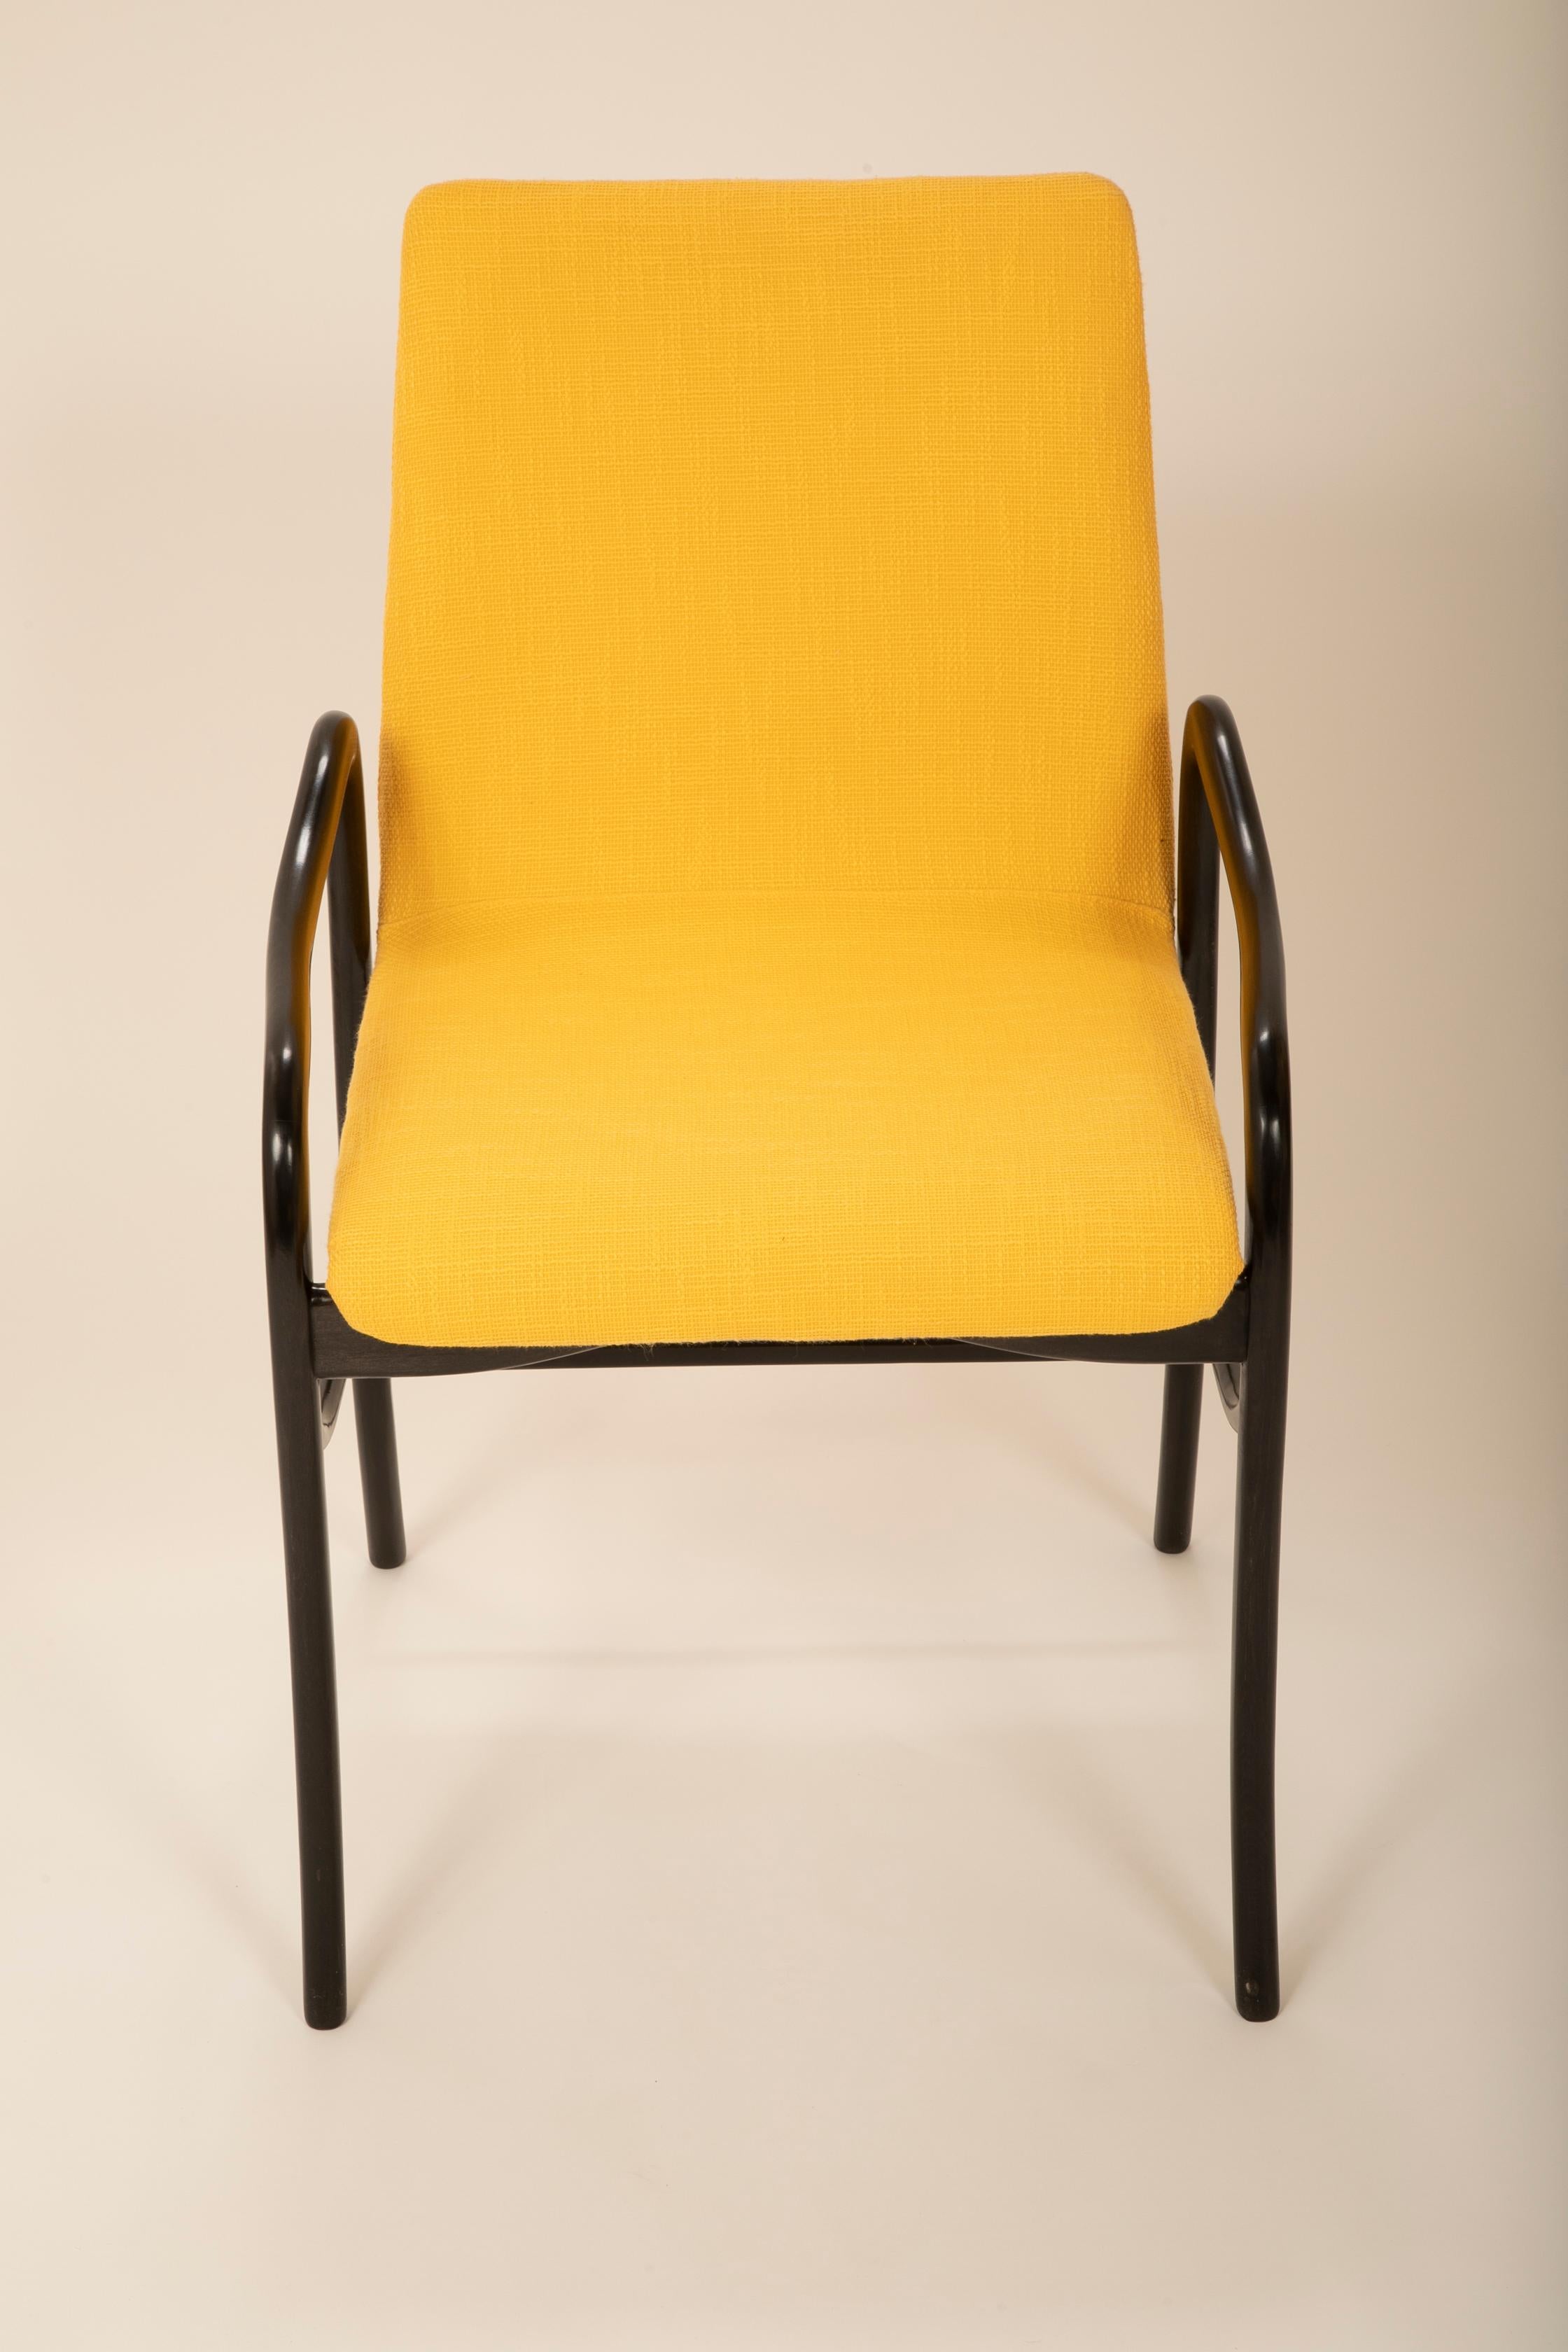 Mid-20th Century Set of 8 Sculptural Italian Dining Chairs Attributed to Malatesta & Mason For Sale